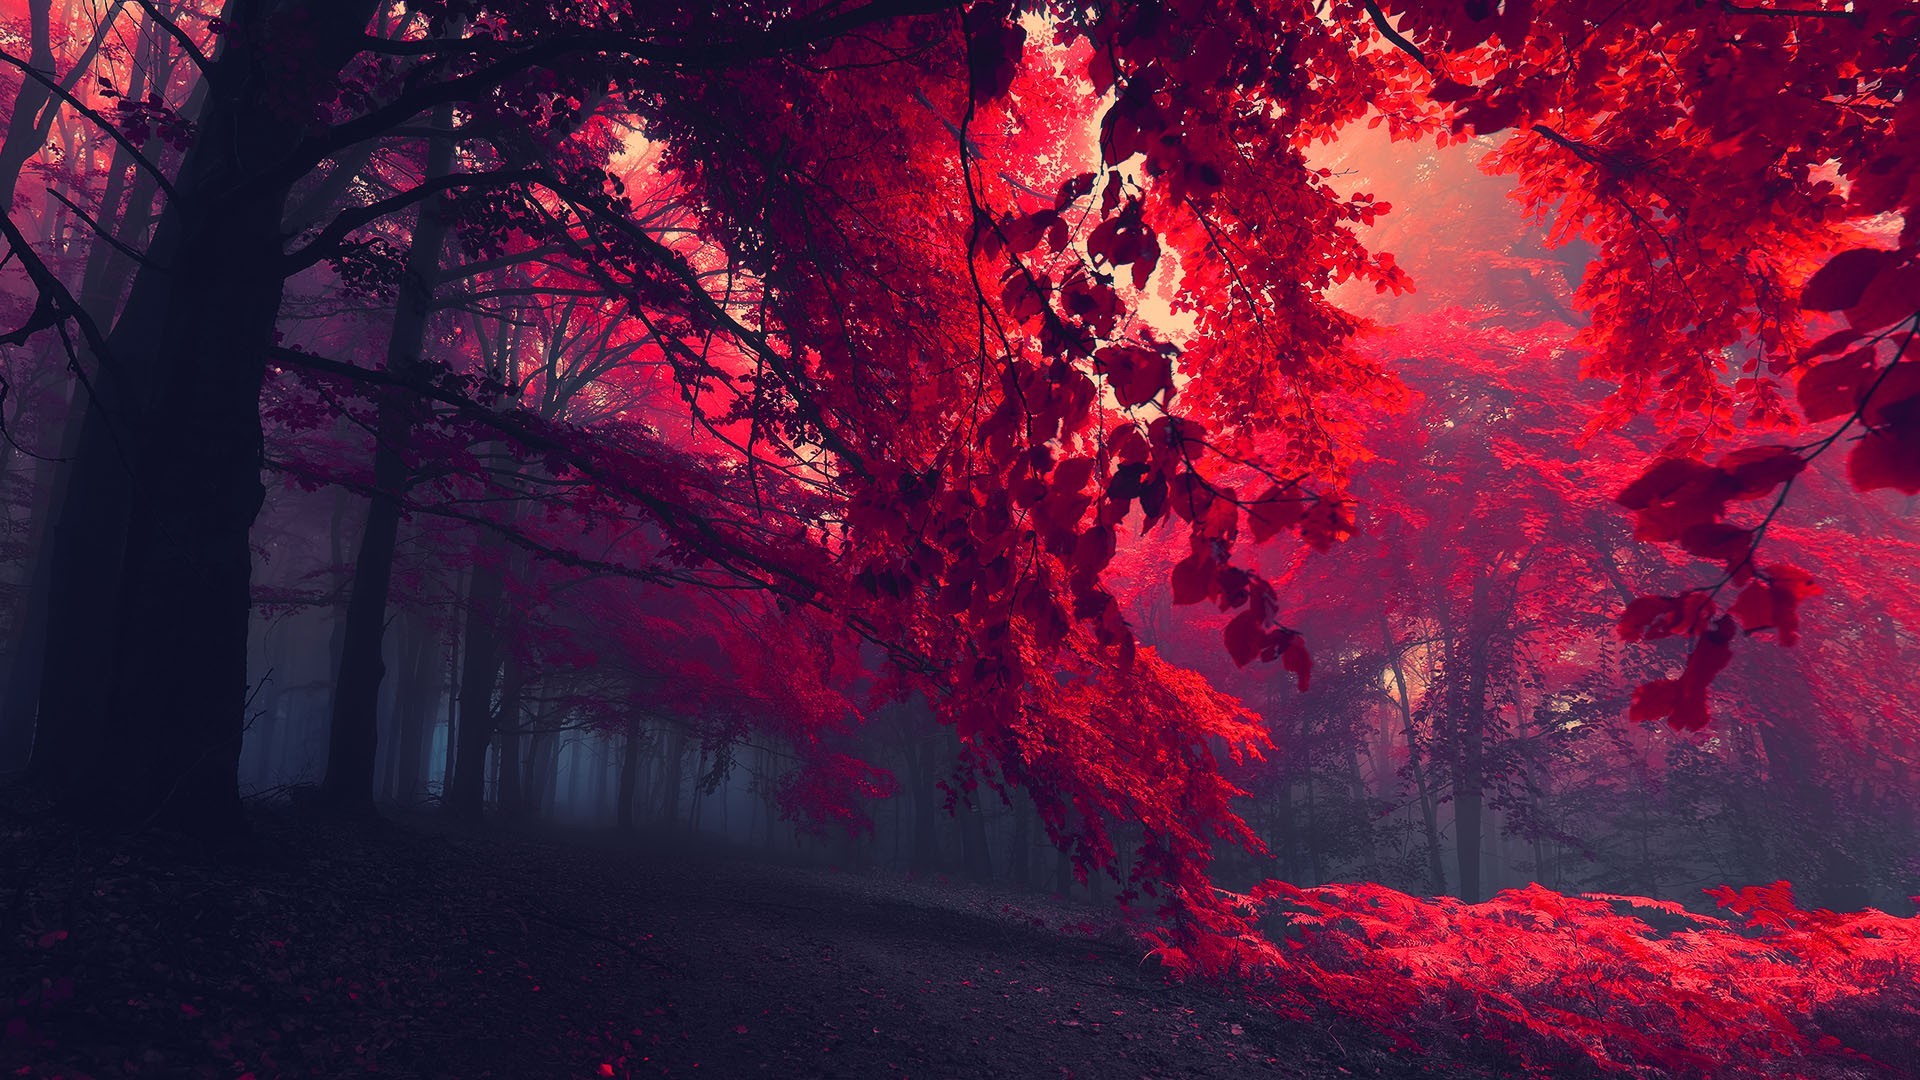 General 1920x1080 dark red nature forest trees red leaves mist fall landscape leaves plants fallen leaves